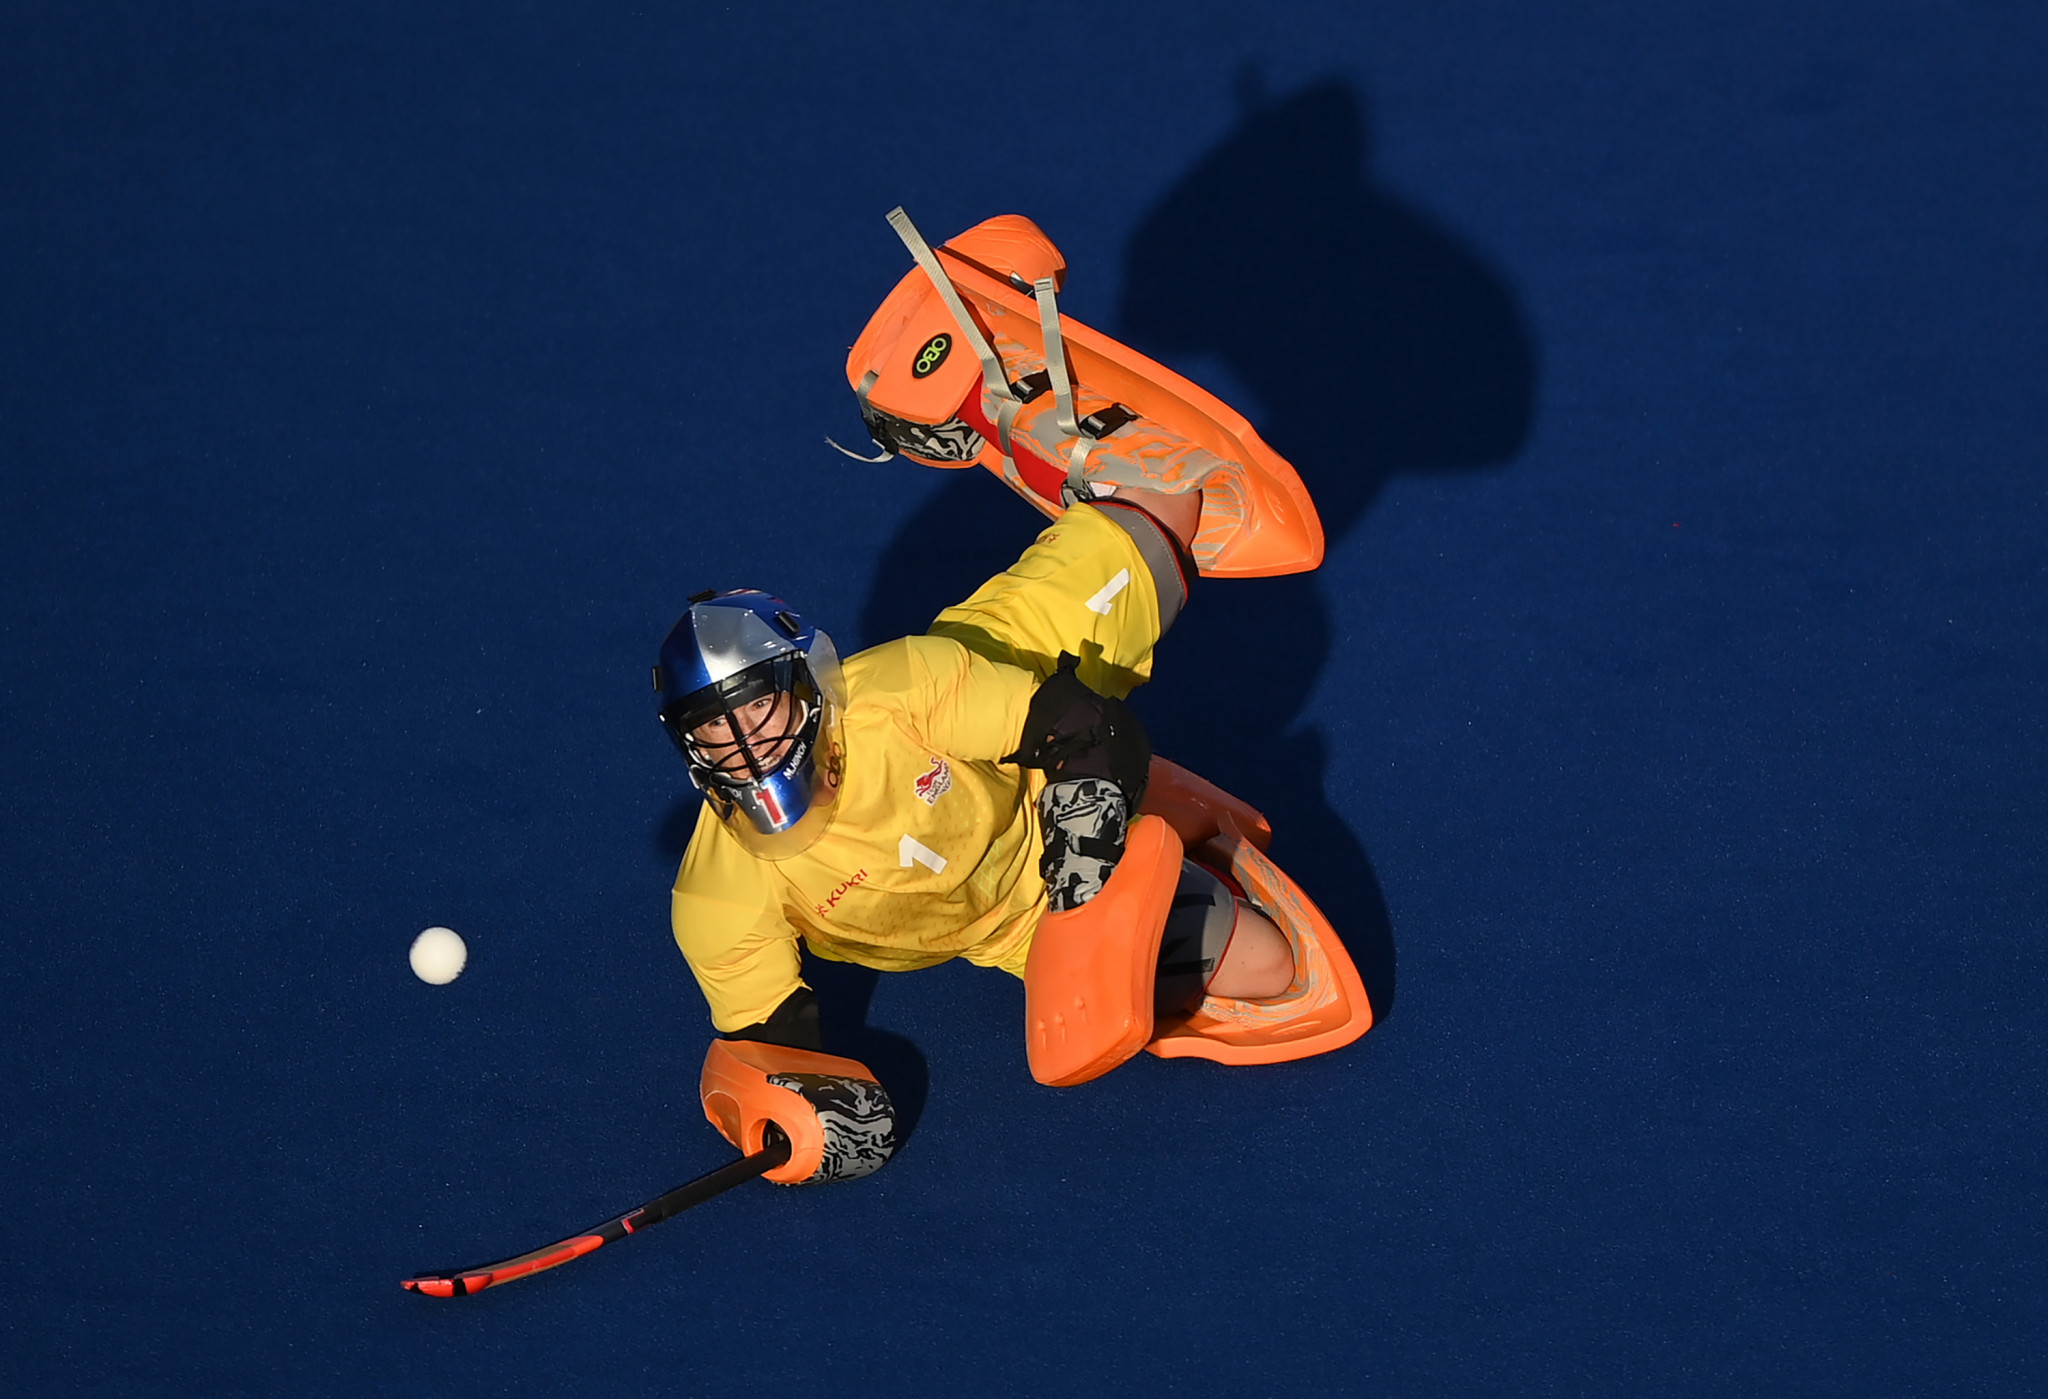 England goalkeeper Maddie Hinch believes a home crowd can make the difference in the women's hockey final ©Getty Images